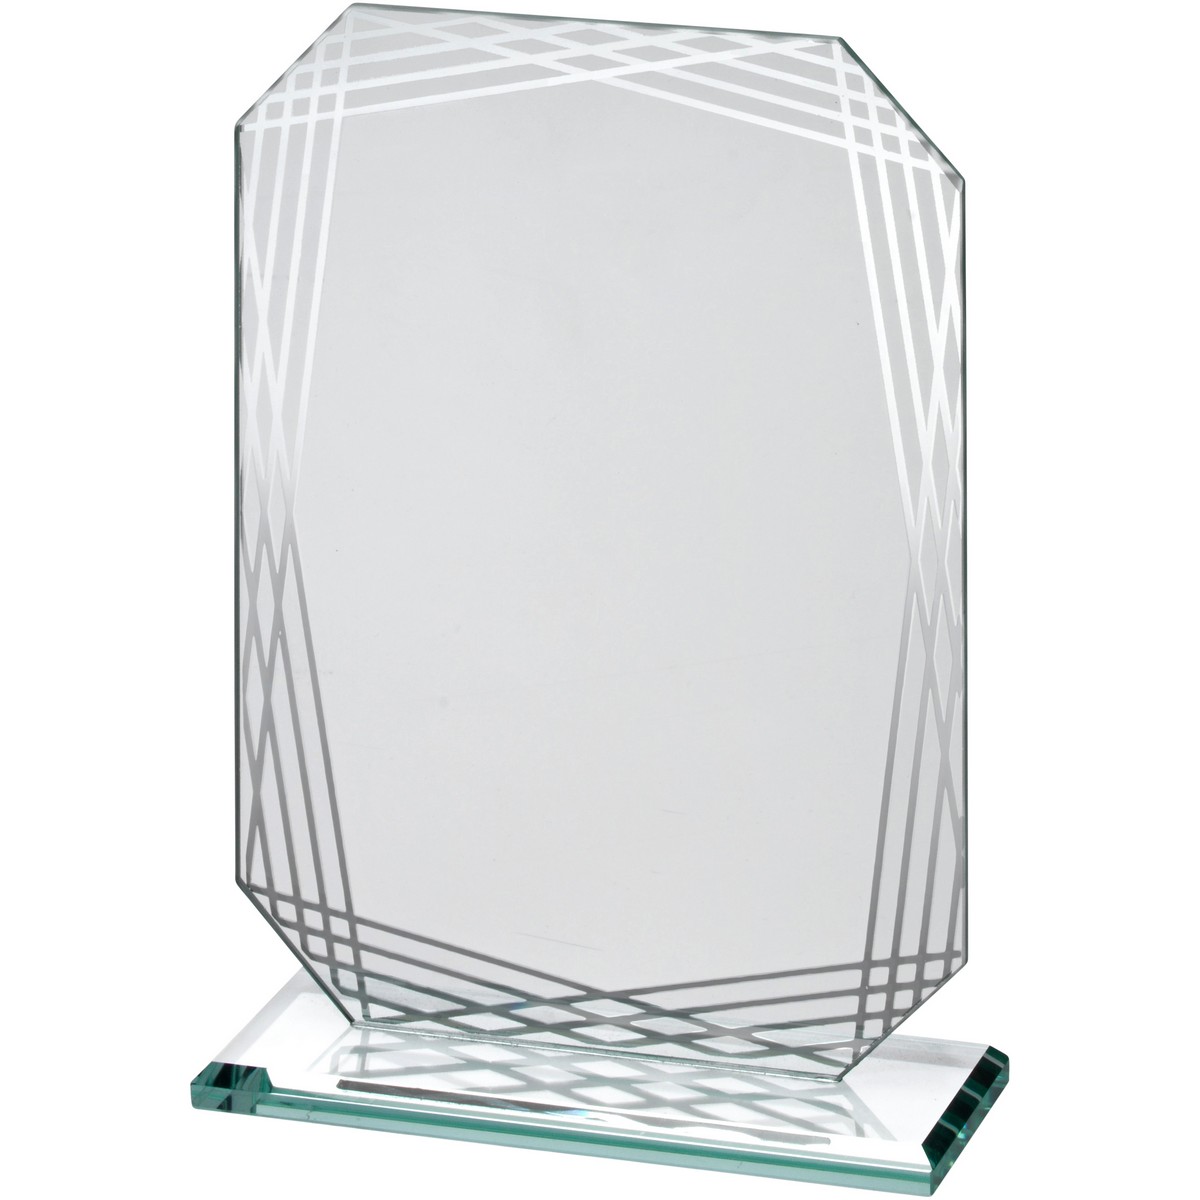 JADE GLASS RECTANGLE WITH SILVER LINED EDGES